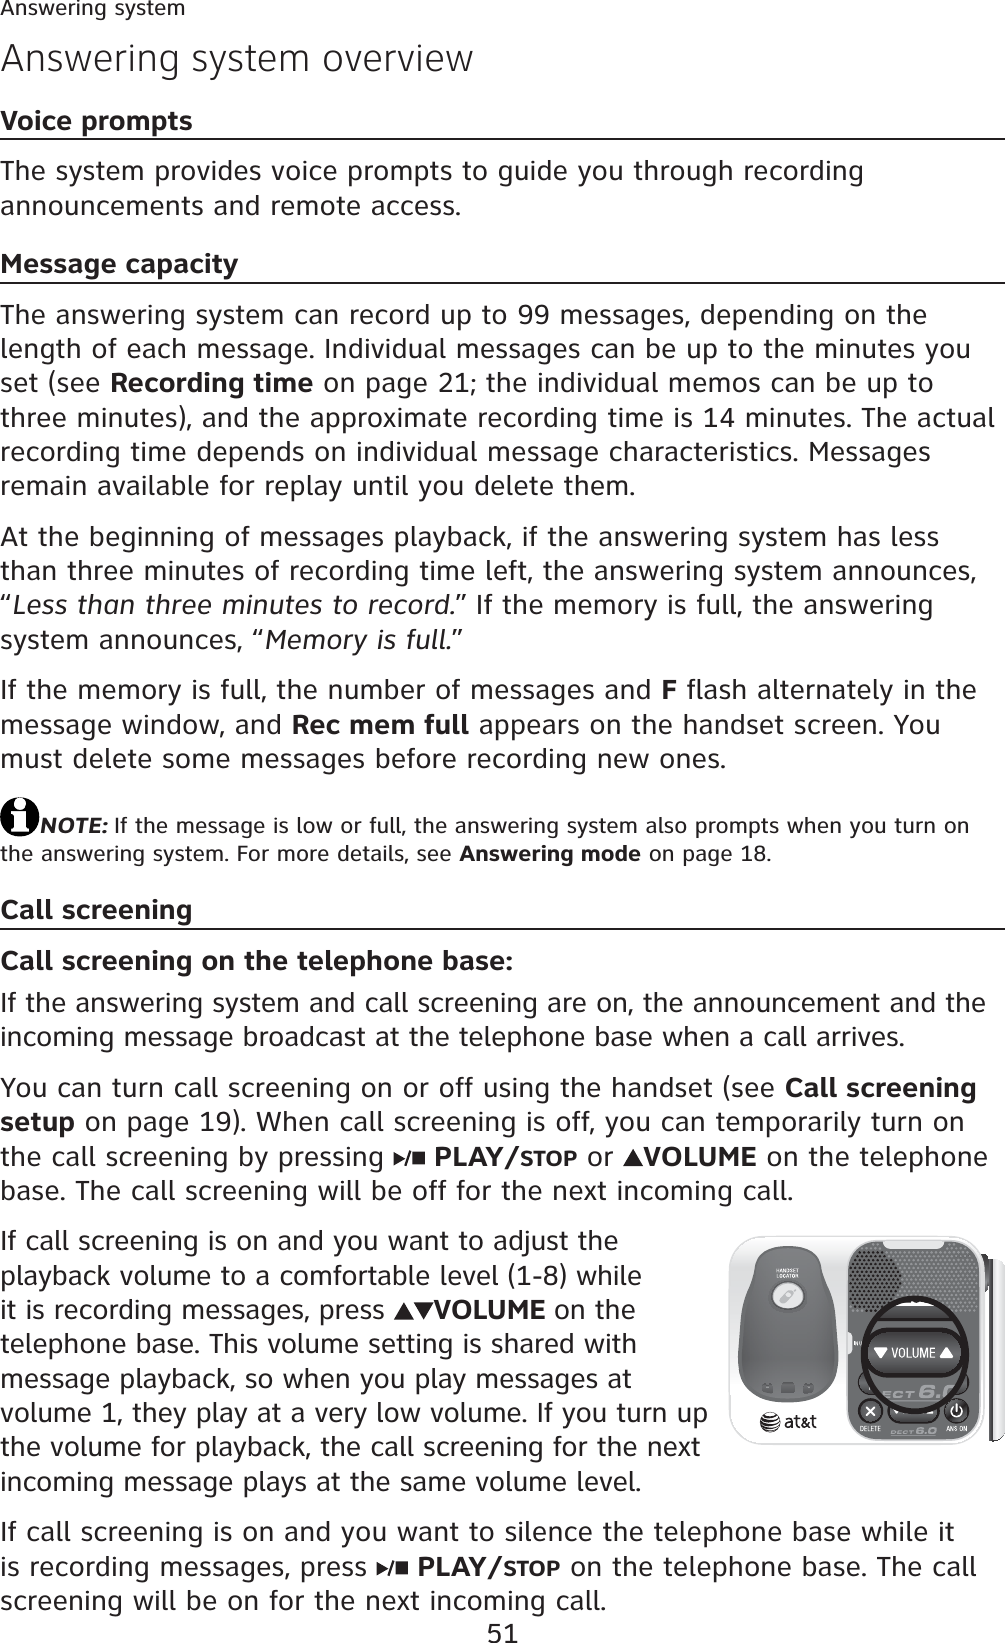 51Answering systemAnswering system overviewVoice promptsThe system provides voice prompts to guide you through recording announcements and remote access.Message capacityThe answering system can record up to 99 messages, depending on the length of each message. Individual messages can be up to the minutes you set (see Recording time on page 21; the individual memos can be up to three minutes), and the approximate recording time is 14 minutes. The actual recording time depends on individual message characteristics. Messages remain available for replay until you delete them.At the beginning of messages playback, if the answering system has less than three minutes of recording time left, the answering system announces, “Less than three minutes to record.” If the memory is full, the answering system announces, “Memory is full.”If the memory is full, the number of messages and F flash alternately in the message window, and Rec mem full appears on the handset screen. You must delete some messages before recording new ones.NOTE: If the message is low or full, the answering system also prompts when you turn on the answering system. For more details, see Answering mode on page 18.Call screeningCall screening on the telephone base:If the answering system and call screening are on, the announcement and the incoming message broadcast at the telephone base when a call arrives.You can turn call screening on or off using the handset (see Call screening setup on page 19). When call screening is off, you can temporarily turn on the call screening by pressing  PLAY/STOP or  VOLUME on the telephone base. The call screening will be off for the next incoming call.If call screening is on and you want to adjust the playback volume to a comfortable level (1-8) while it is recording messages, press  VOLUME on the telephone base. This volume setting is shared with message playback, so when you play messages at volume 1, they play at a very low volume. If you turn up the volume for playback, the call screening for the next incoming message plays at the same volume level.If call screening is on and you want to silence the telephone base while it is recording messages, press  PLAY/STOP on the telephone base. The call screening will be on for the next incoming call.